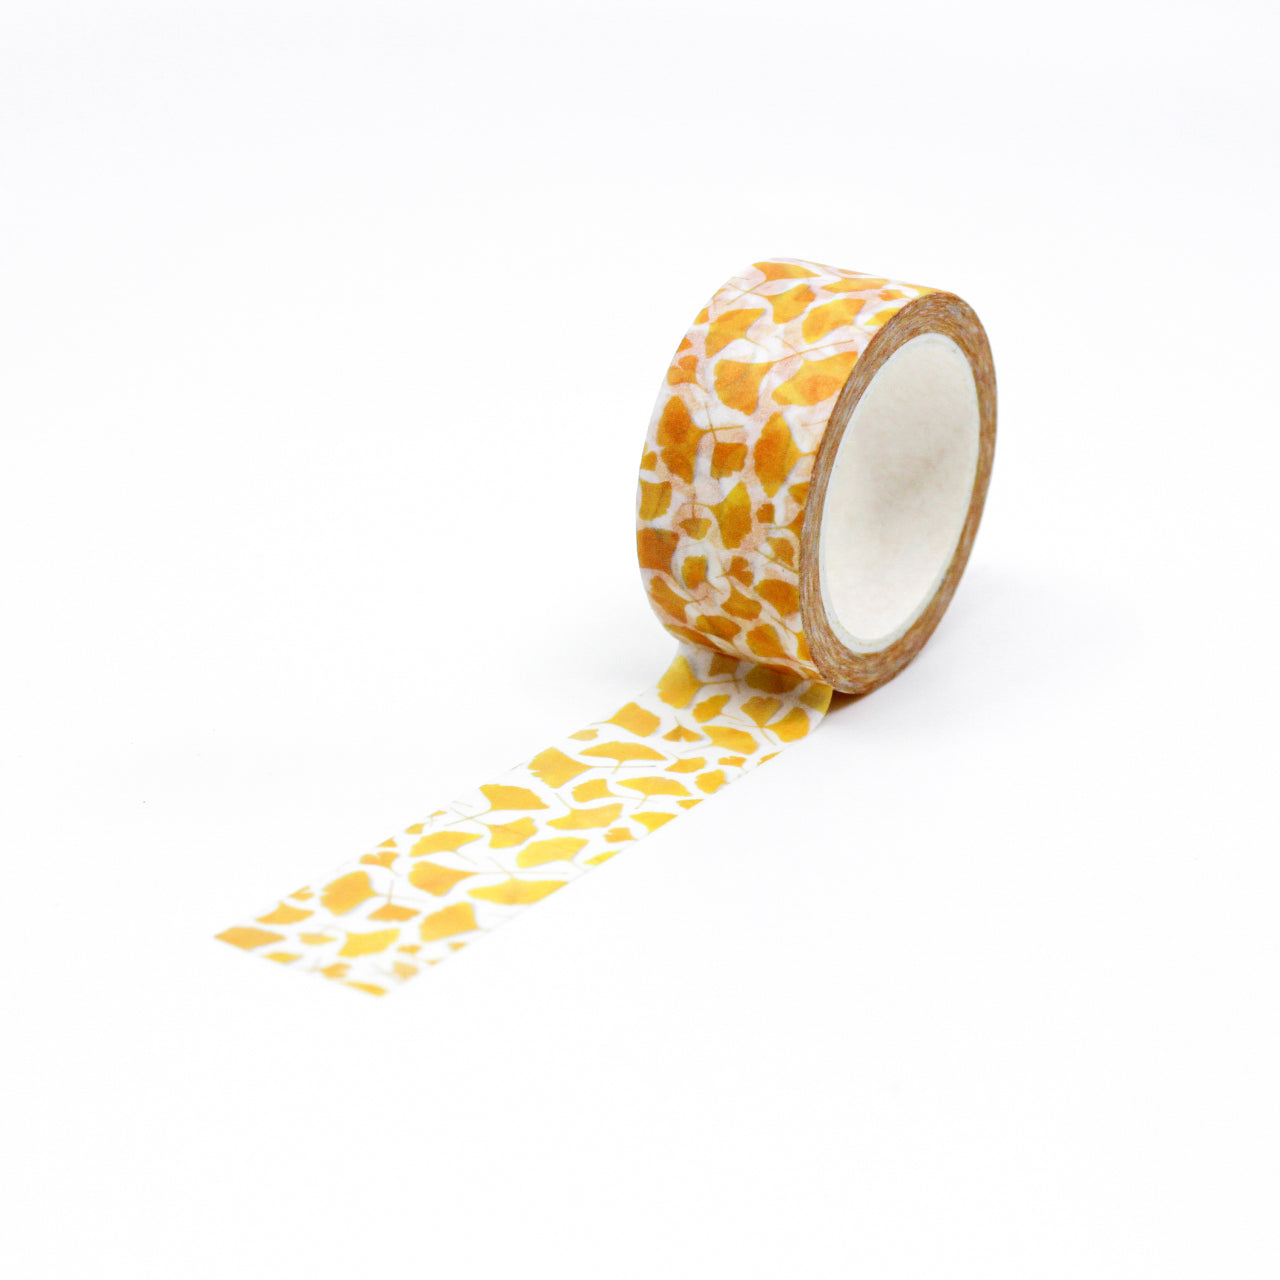 Infuse your projects with the charm of ginkgo leaves using our yellow ginkgo leaf washi tape, adorned with delicate yellow ginkgo leaves for a touch of botanical beauty. This tape is designed by Bottle Branch and sold at BBB Supplies Craft Shop.